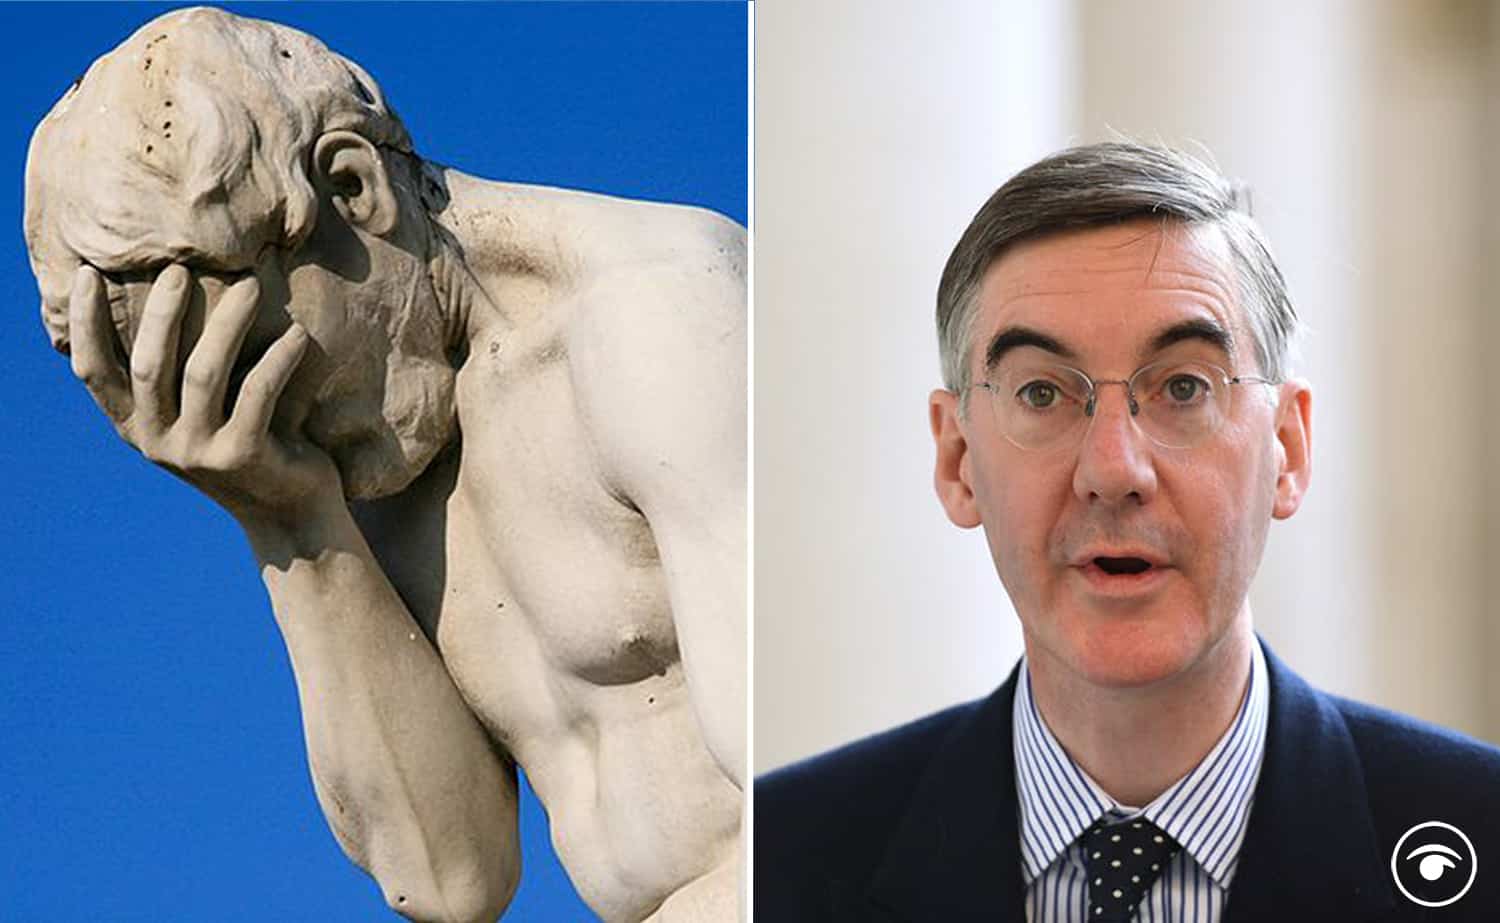 Rees-Mogg accused of ‘twisting history’ in speech on Union